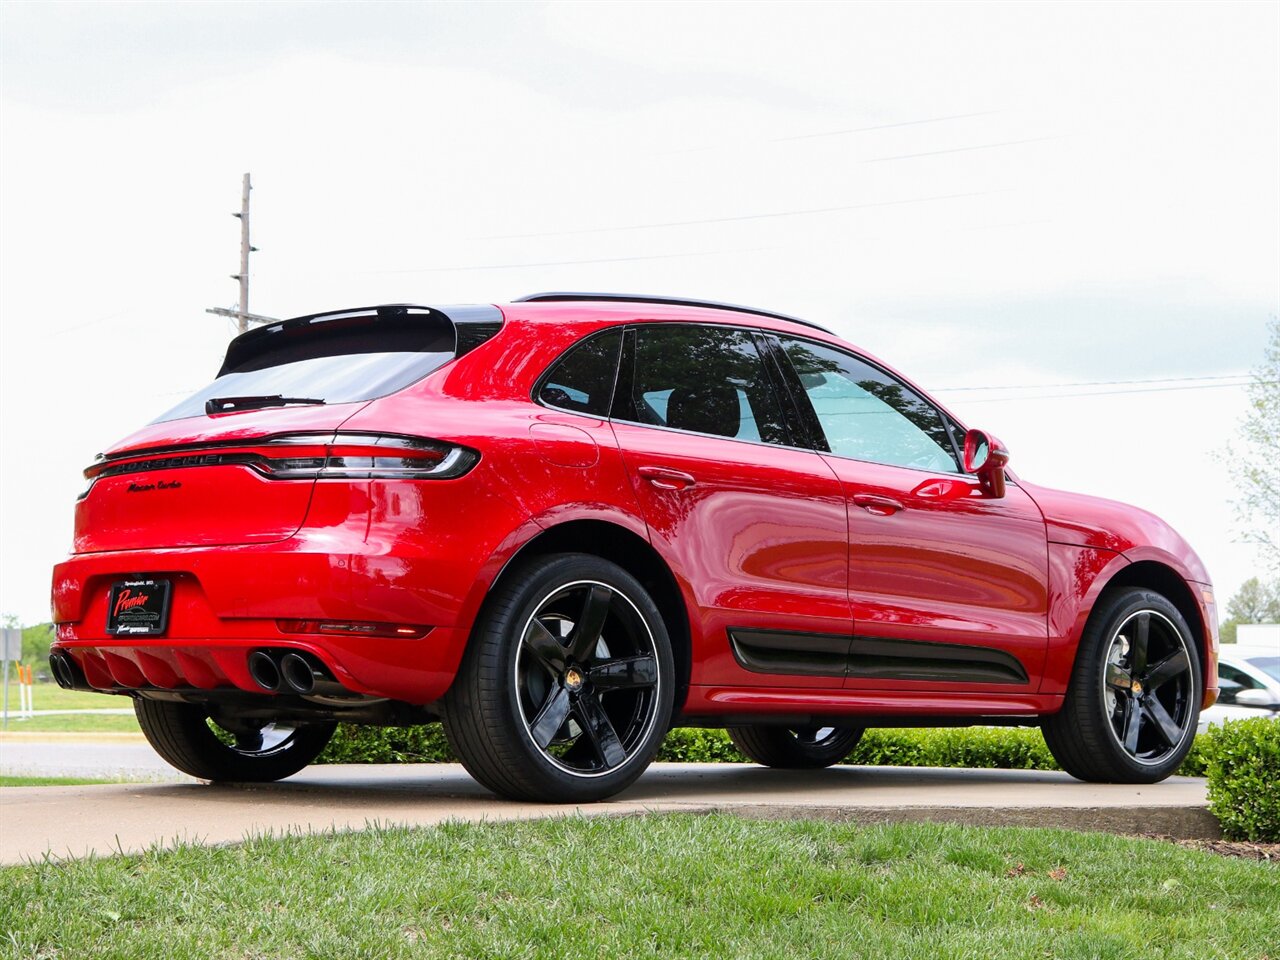 2020 Porsche Macan Turbo  (Lots of options MSRP $124,740) - Photo 38 - Springfield, MO 65802